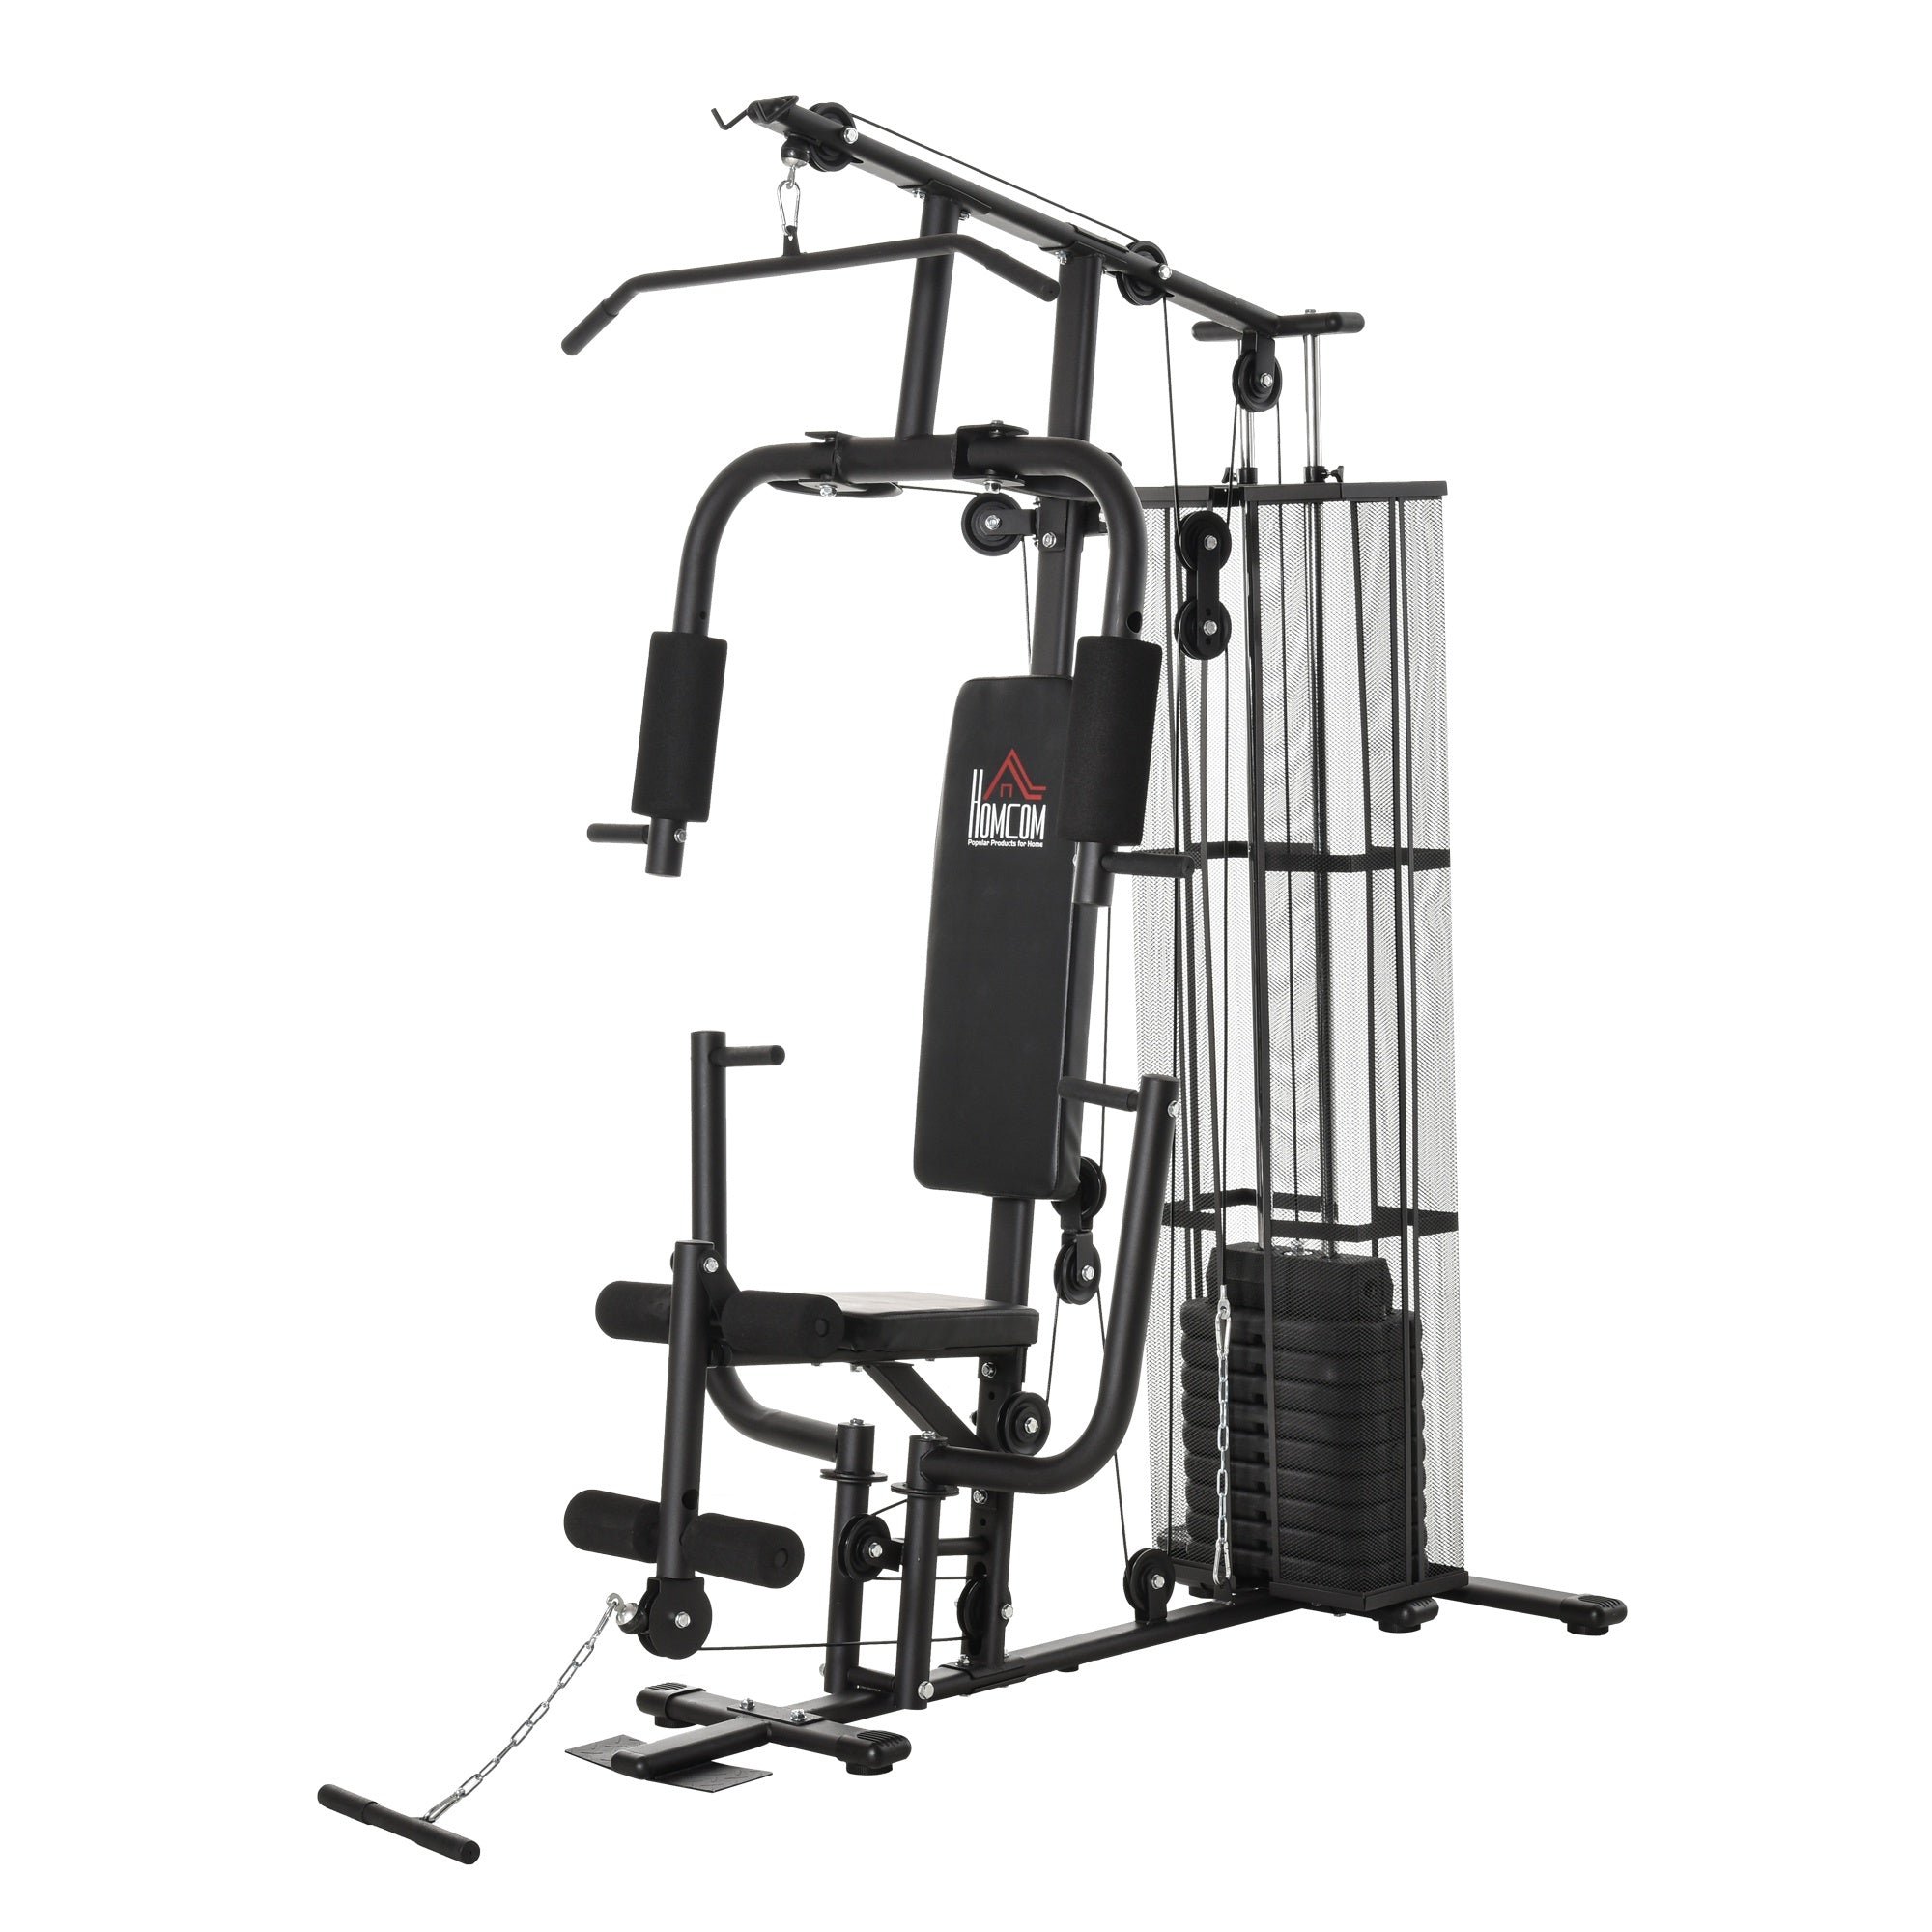 HOMCOM Multifunction Home Gym System Weight Training Exercise Workout Station  | TJ Hughes